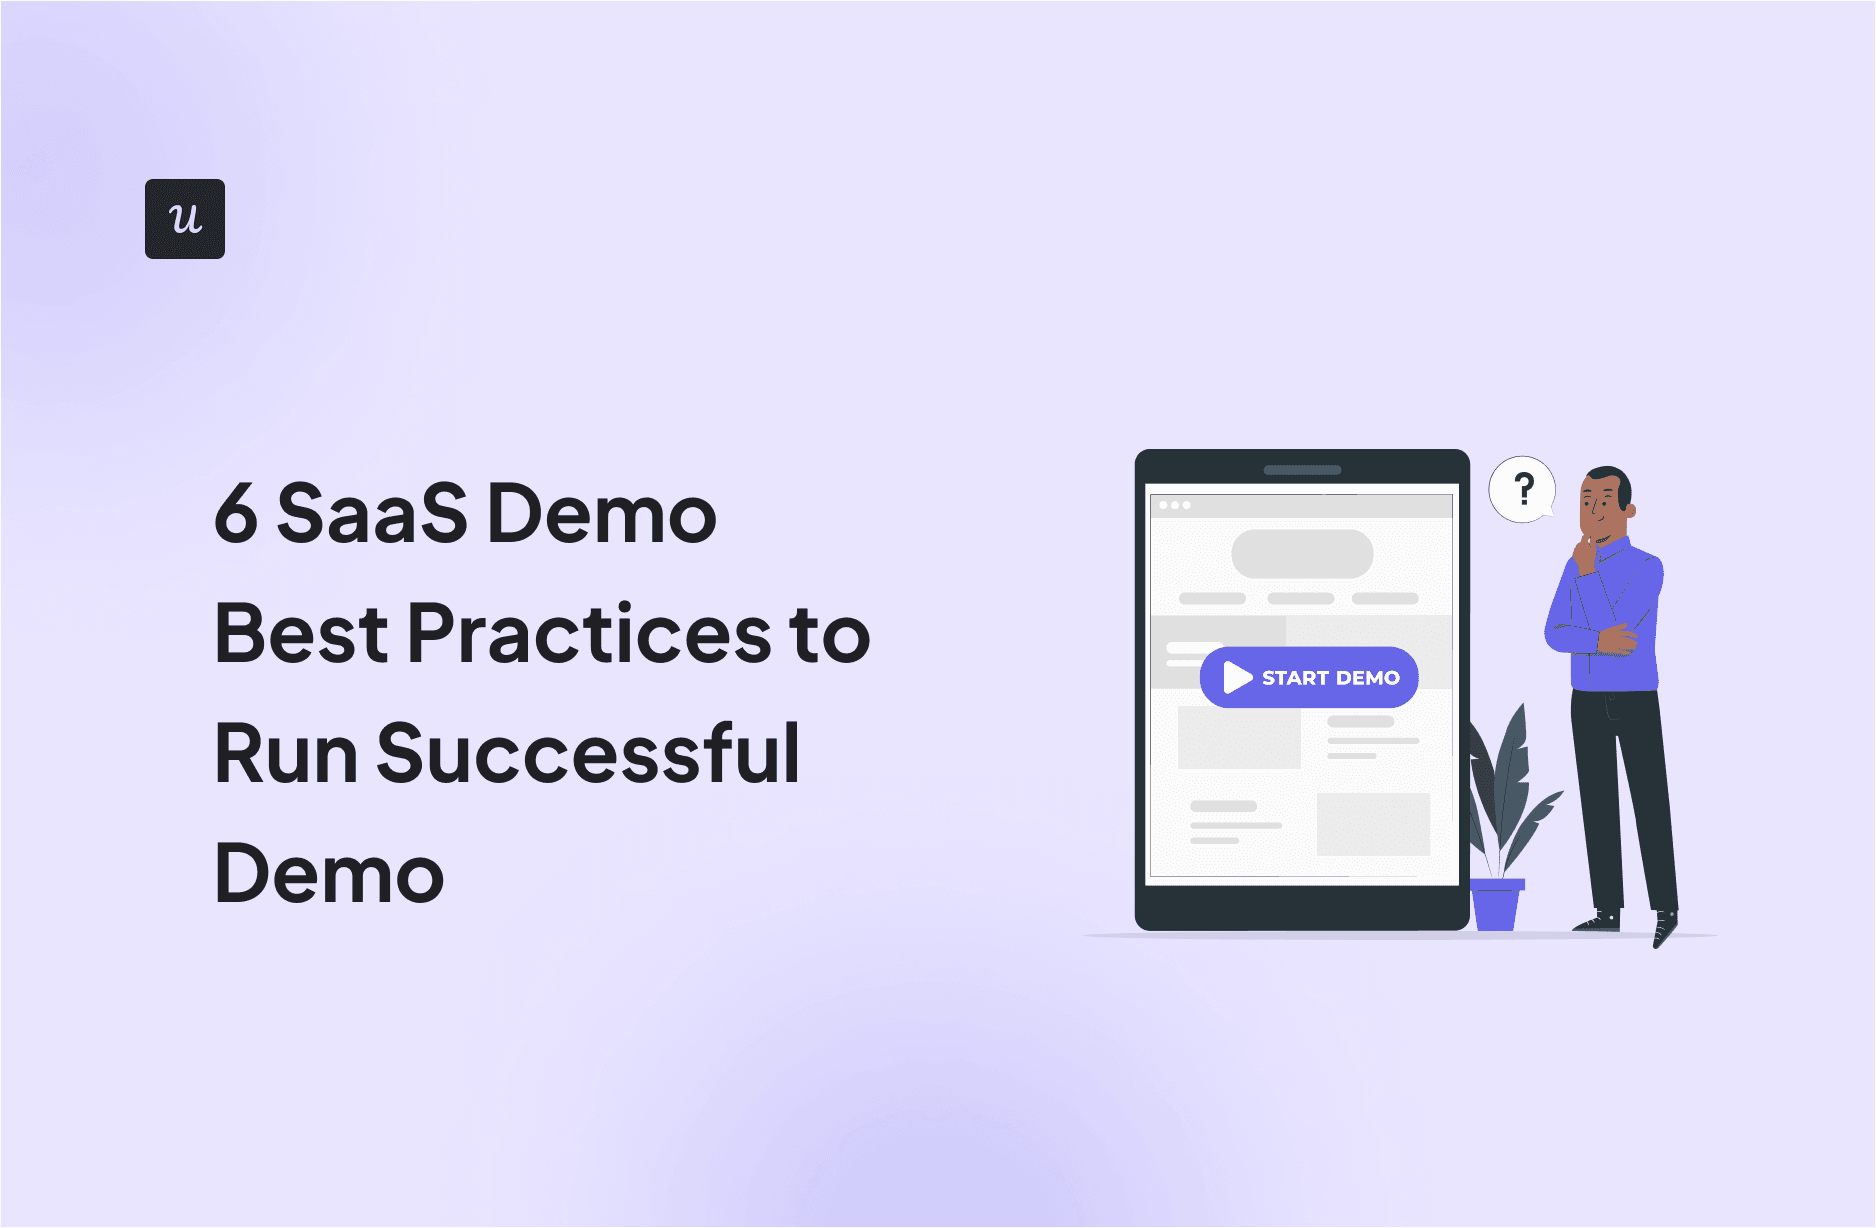 6 SaaS Demo Best Practices to Run Successful Demo cover